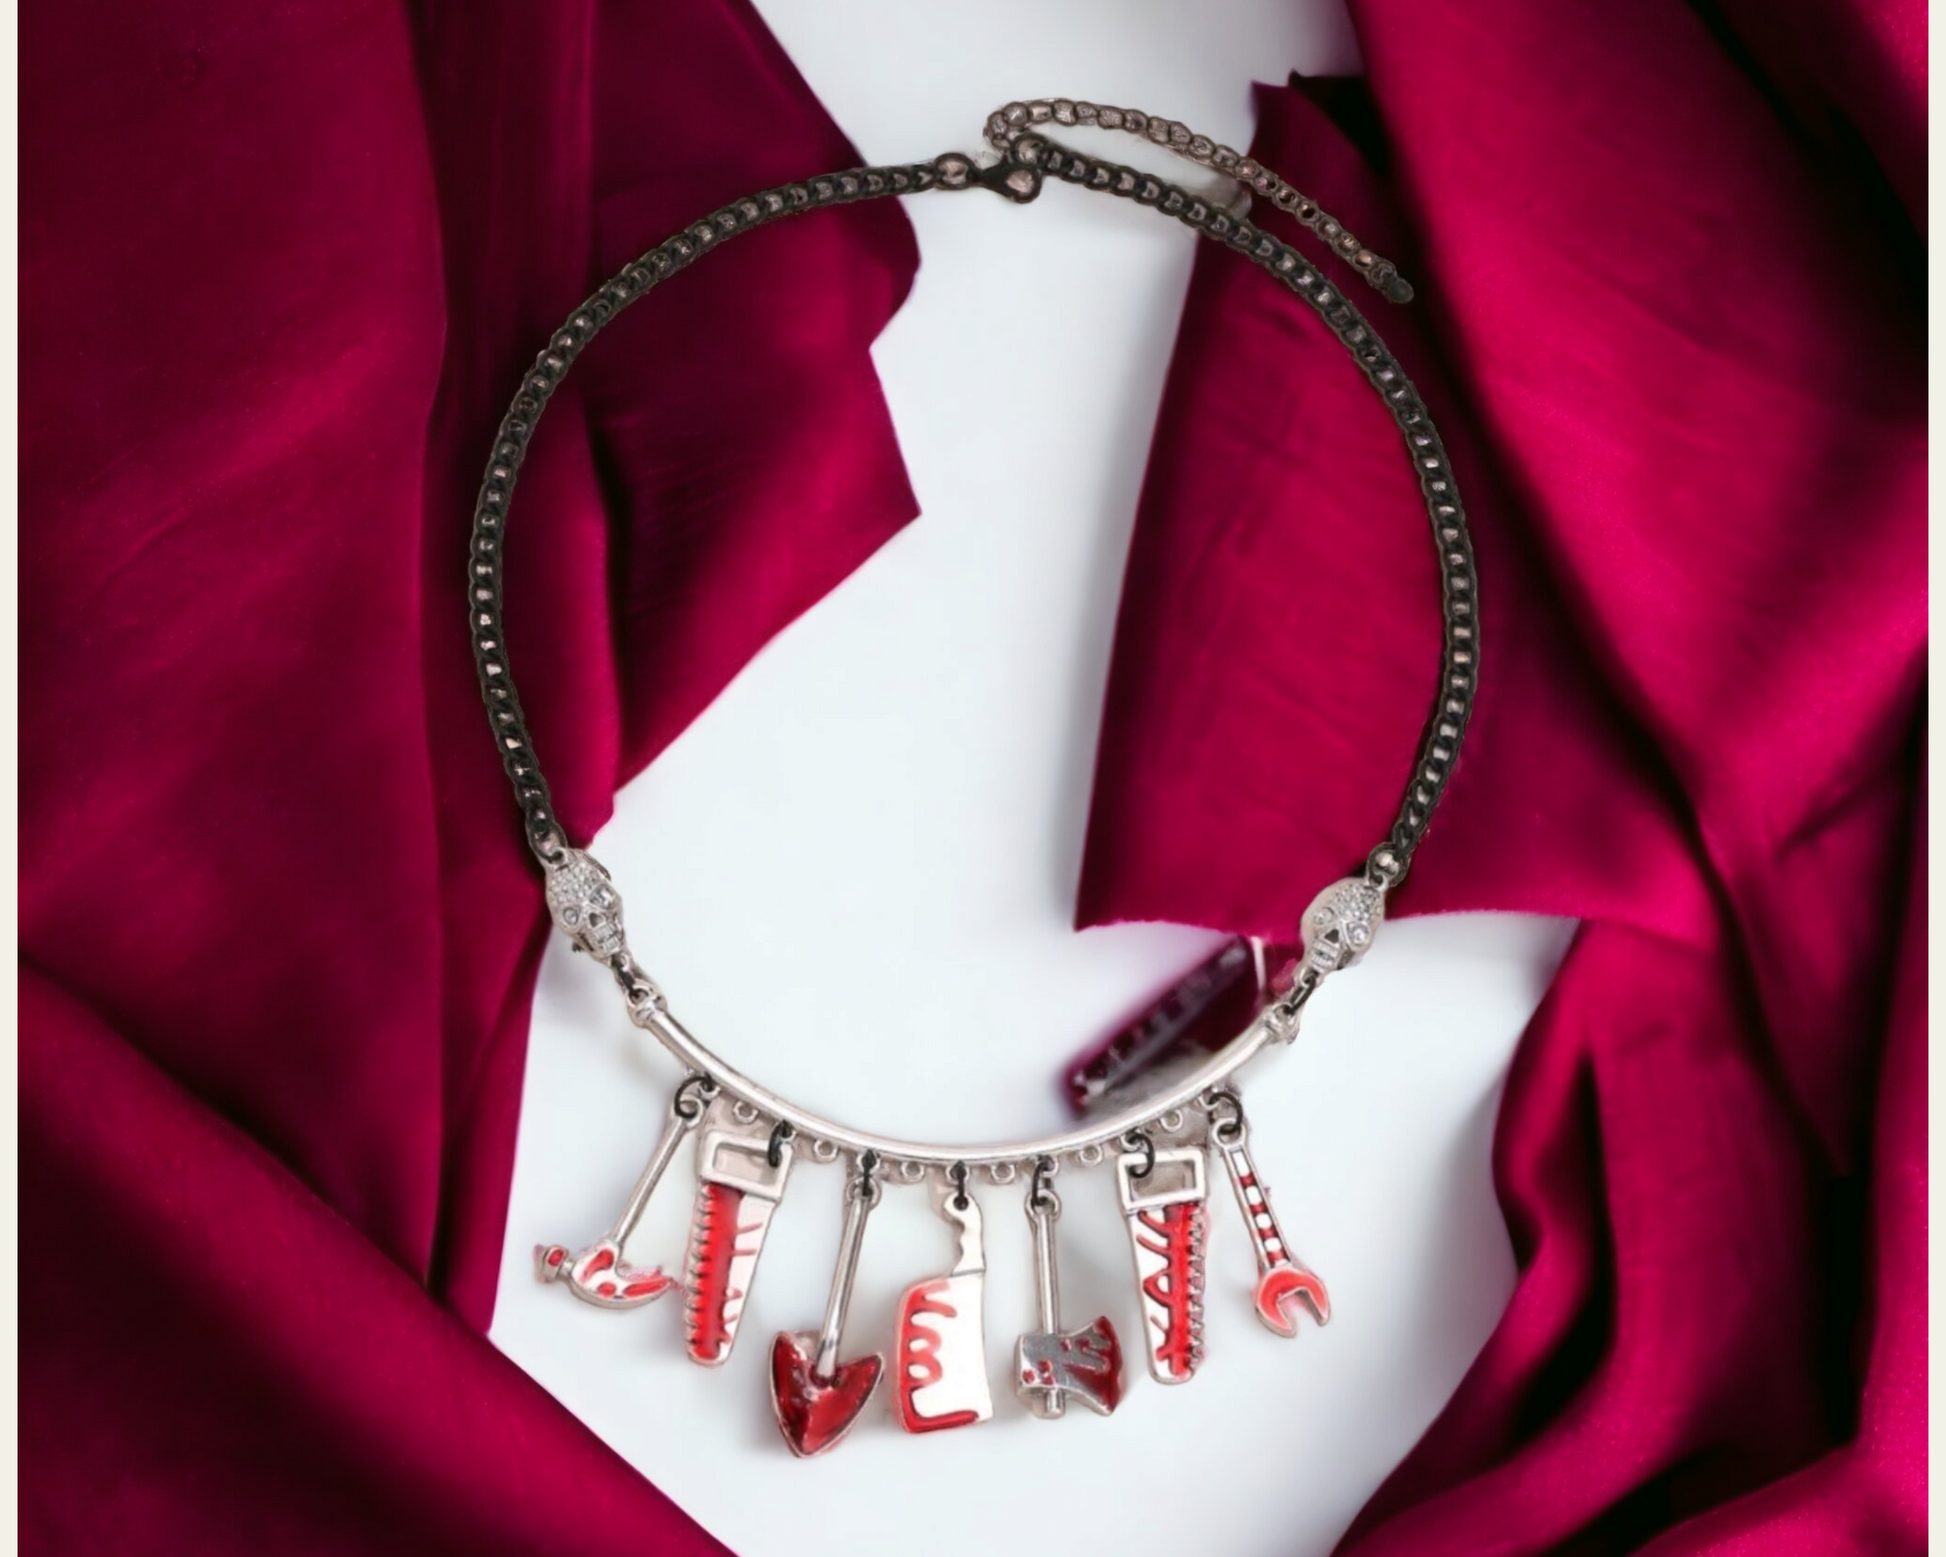 Bloody Weapons Best Friend Necklace Set